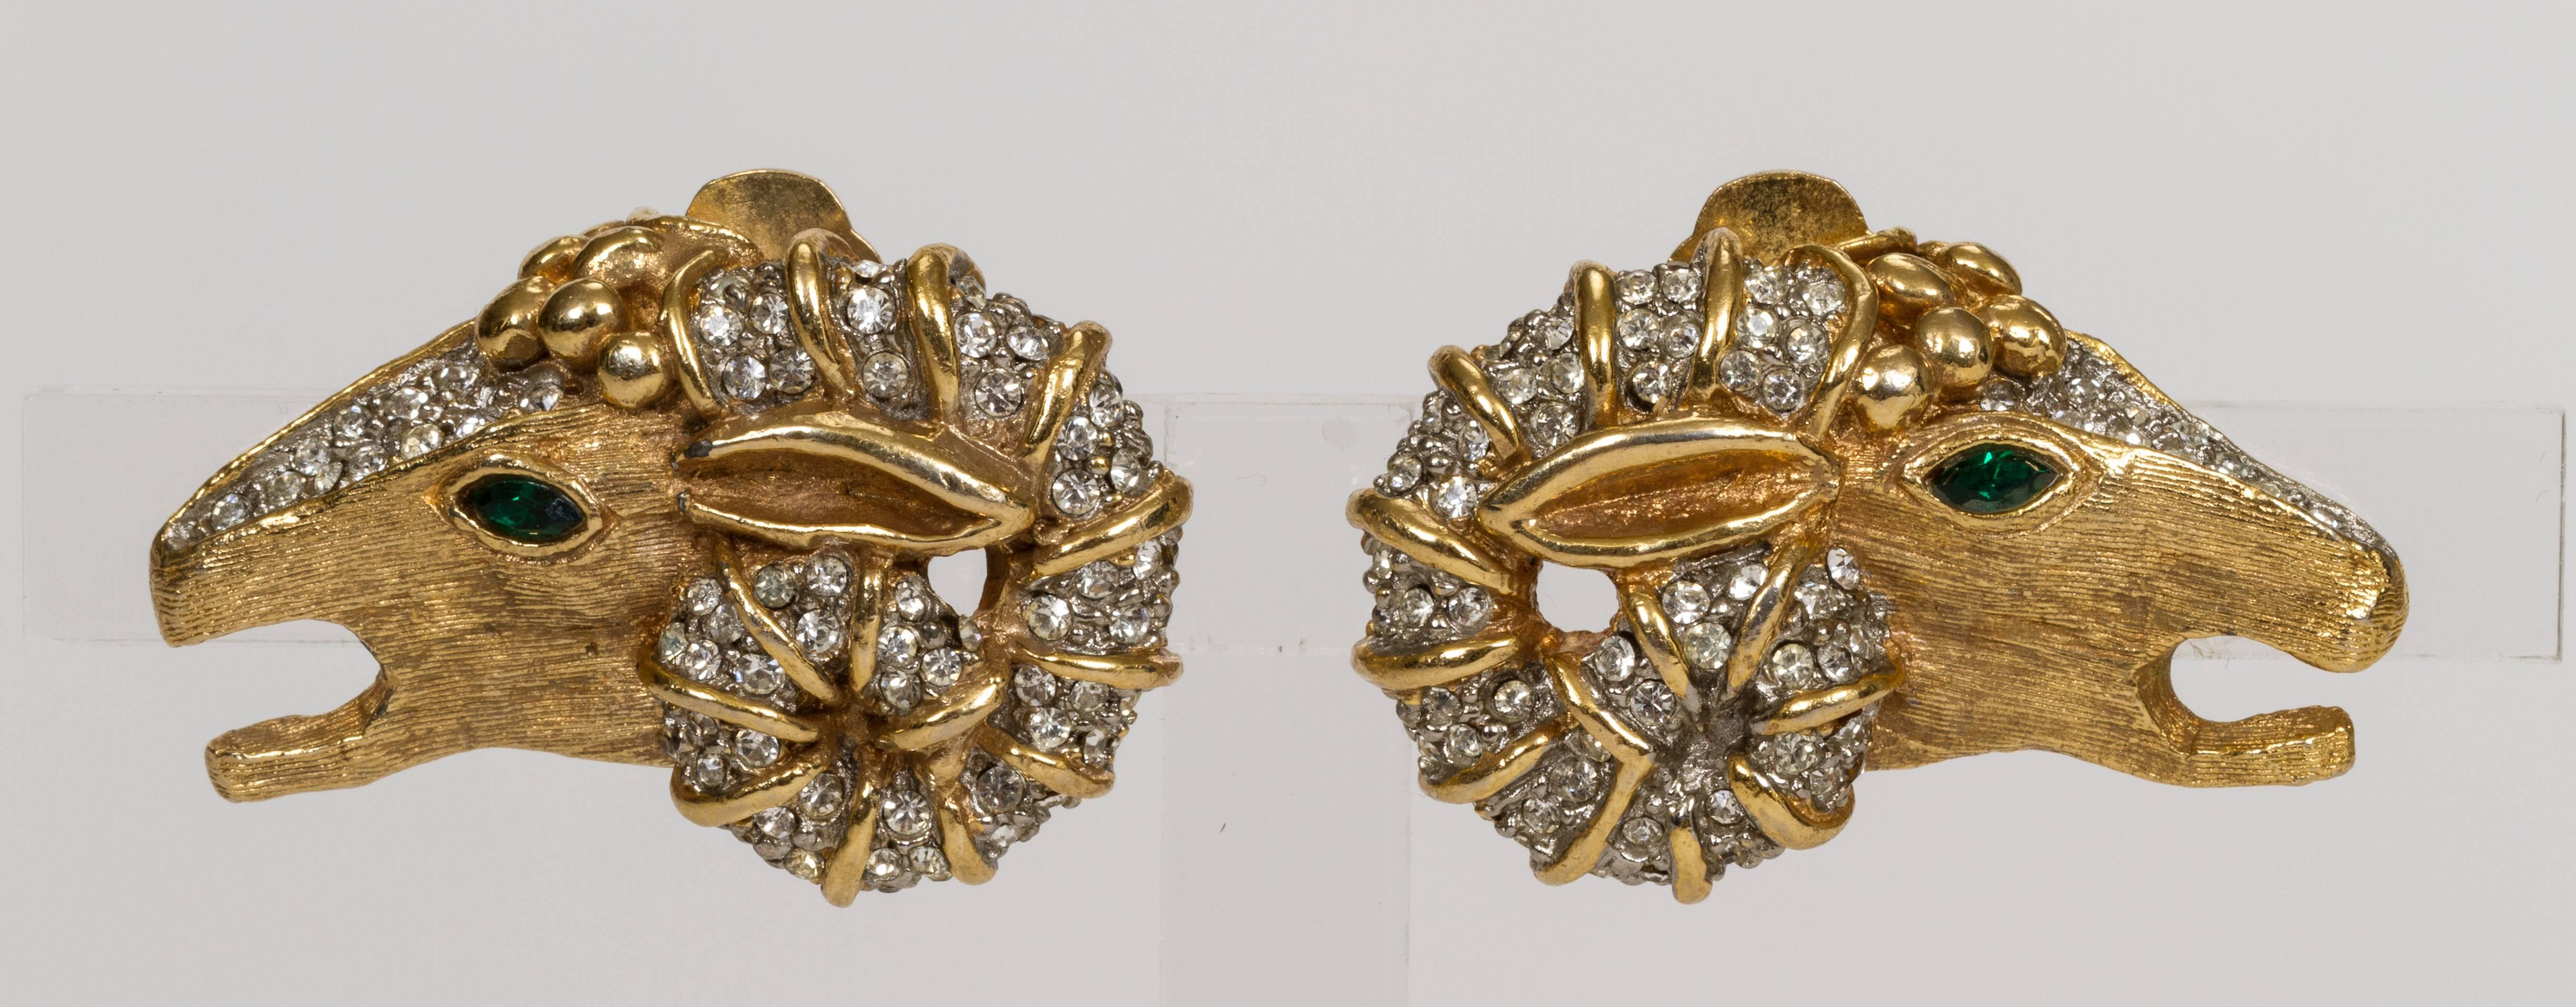 Kenneth Jay Lane iconic gold plated rhinestone clip earrings with emerald class cut eyes. Excellent vintage condition with minor wear. 1960s collection.